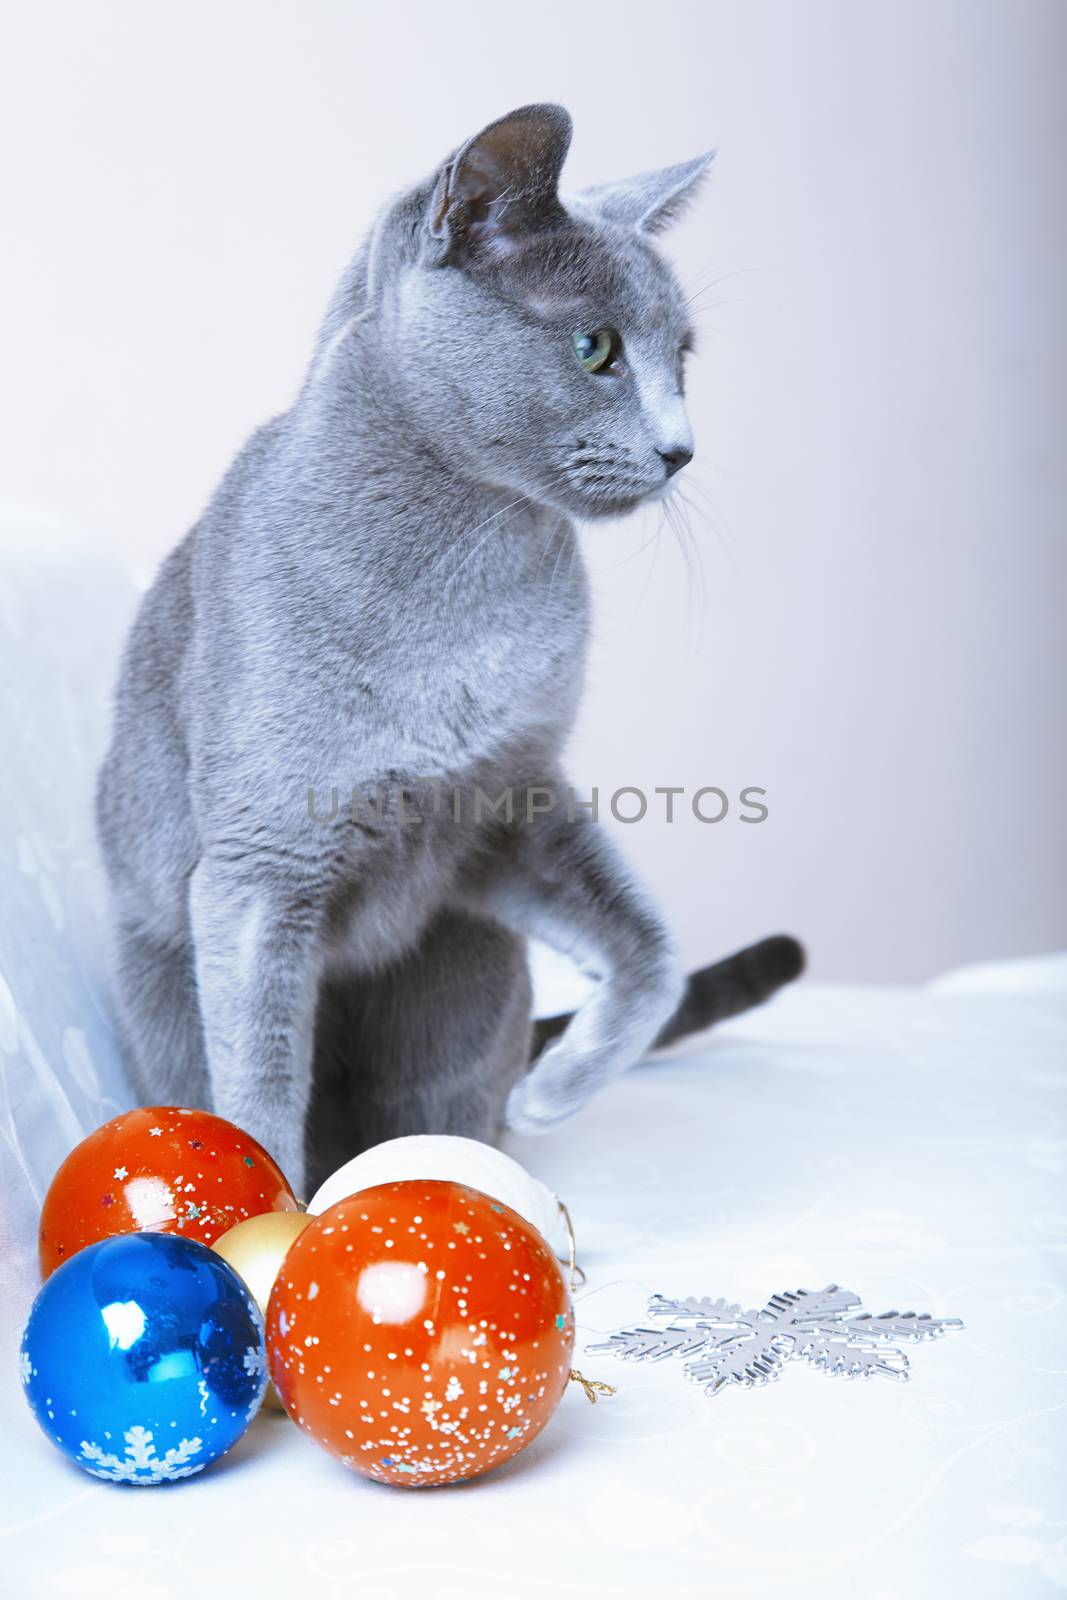 Cat sitting at the Christmas balls and decoration